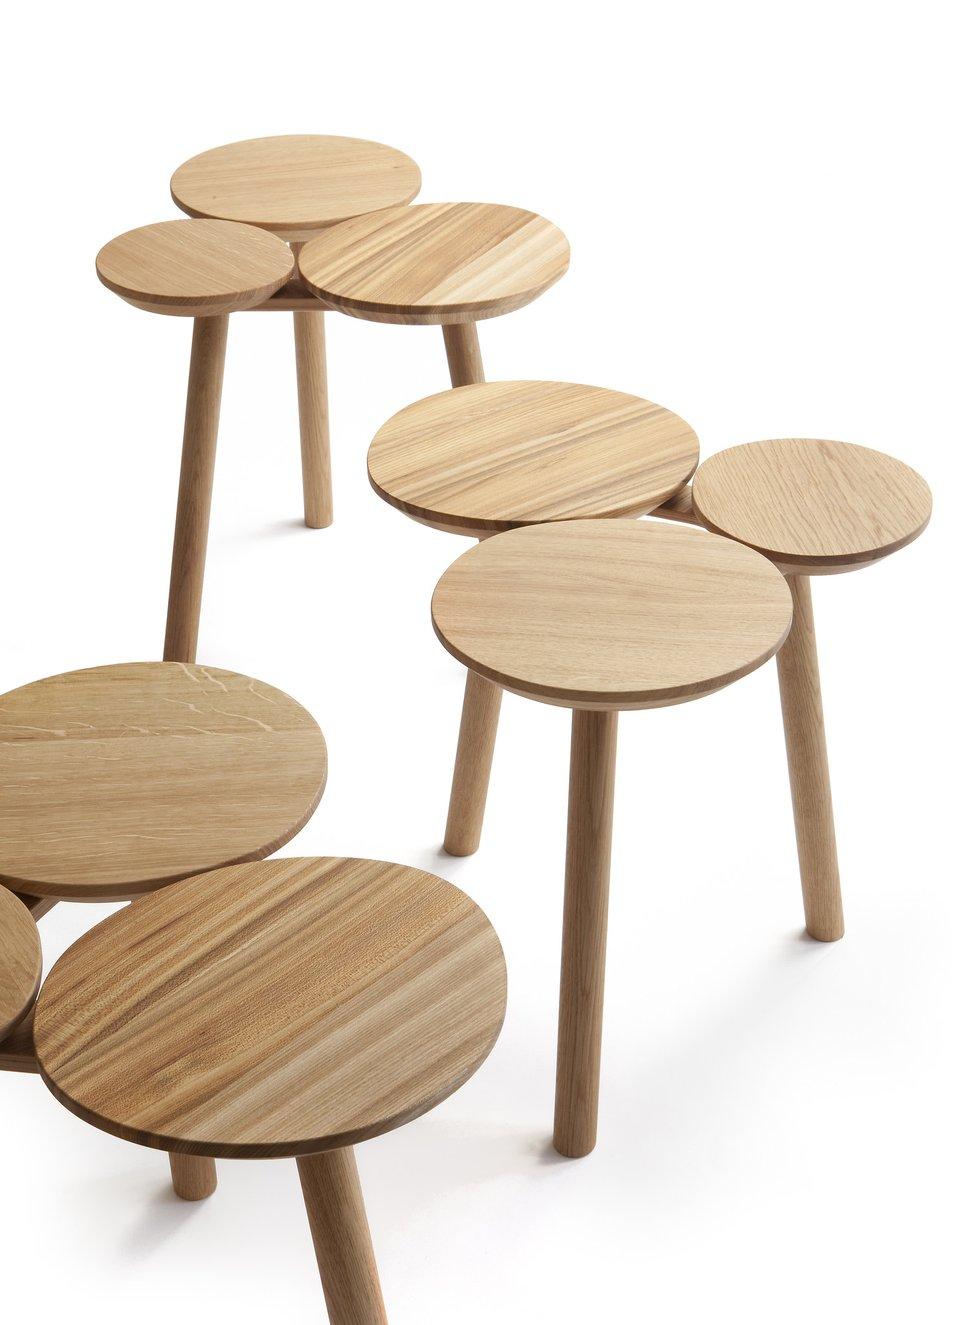 Beautiful July works as a small table as well as a stool. Due to the asymmetrical shape of the product, its manufacture requires a lot of handicraft and various techniques. Inspiration for the shape has been tree trunks.

Material: Elm and